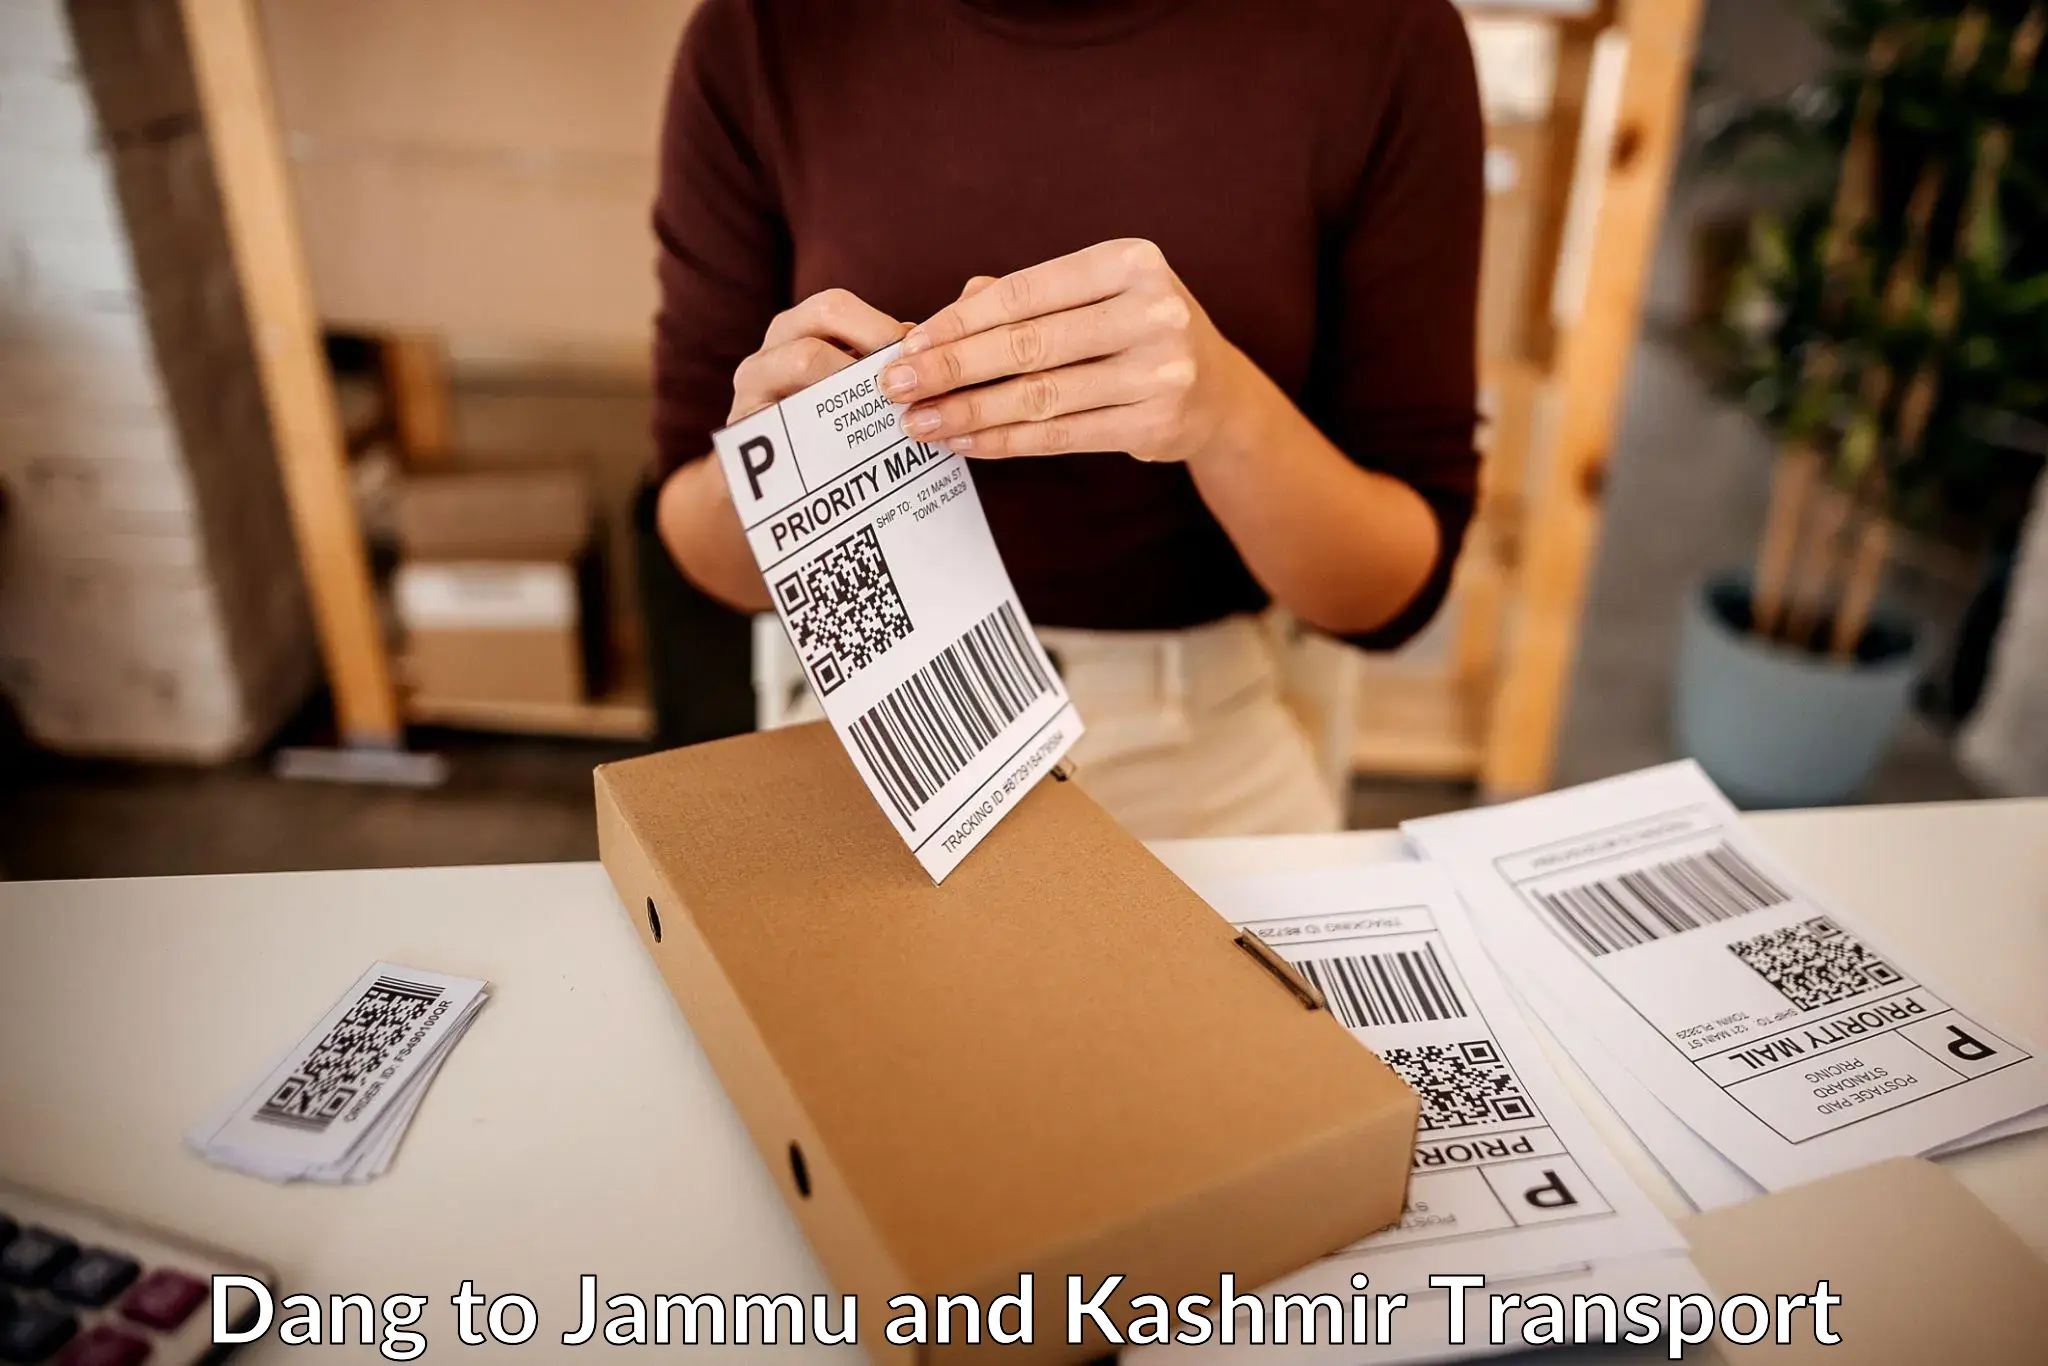 Shipping services Dang to Jammu and Kashmir